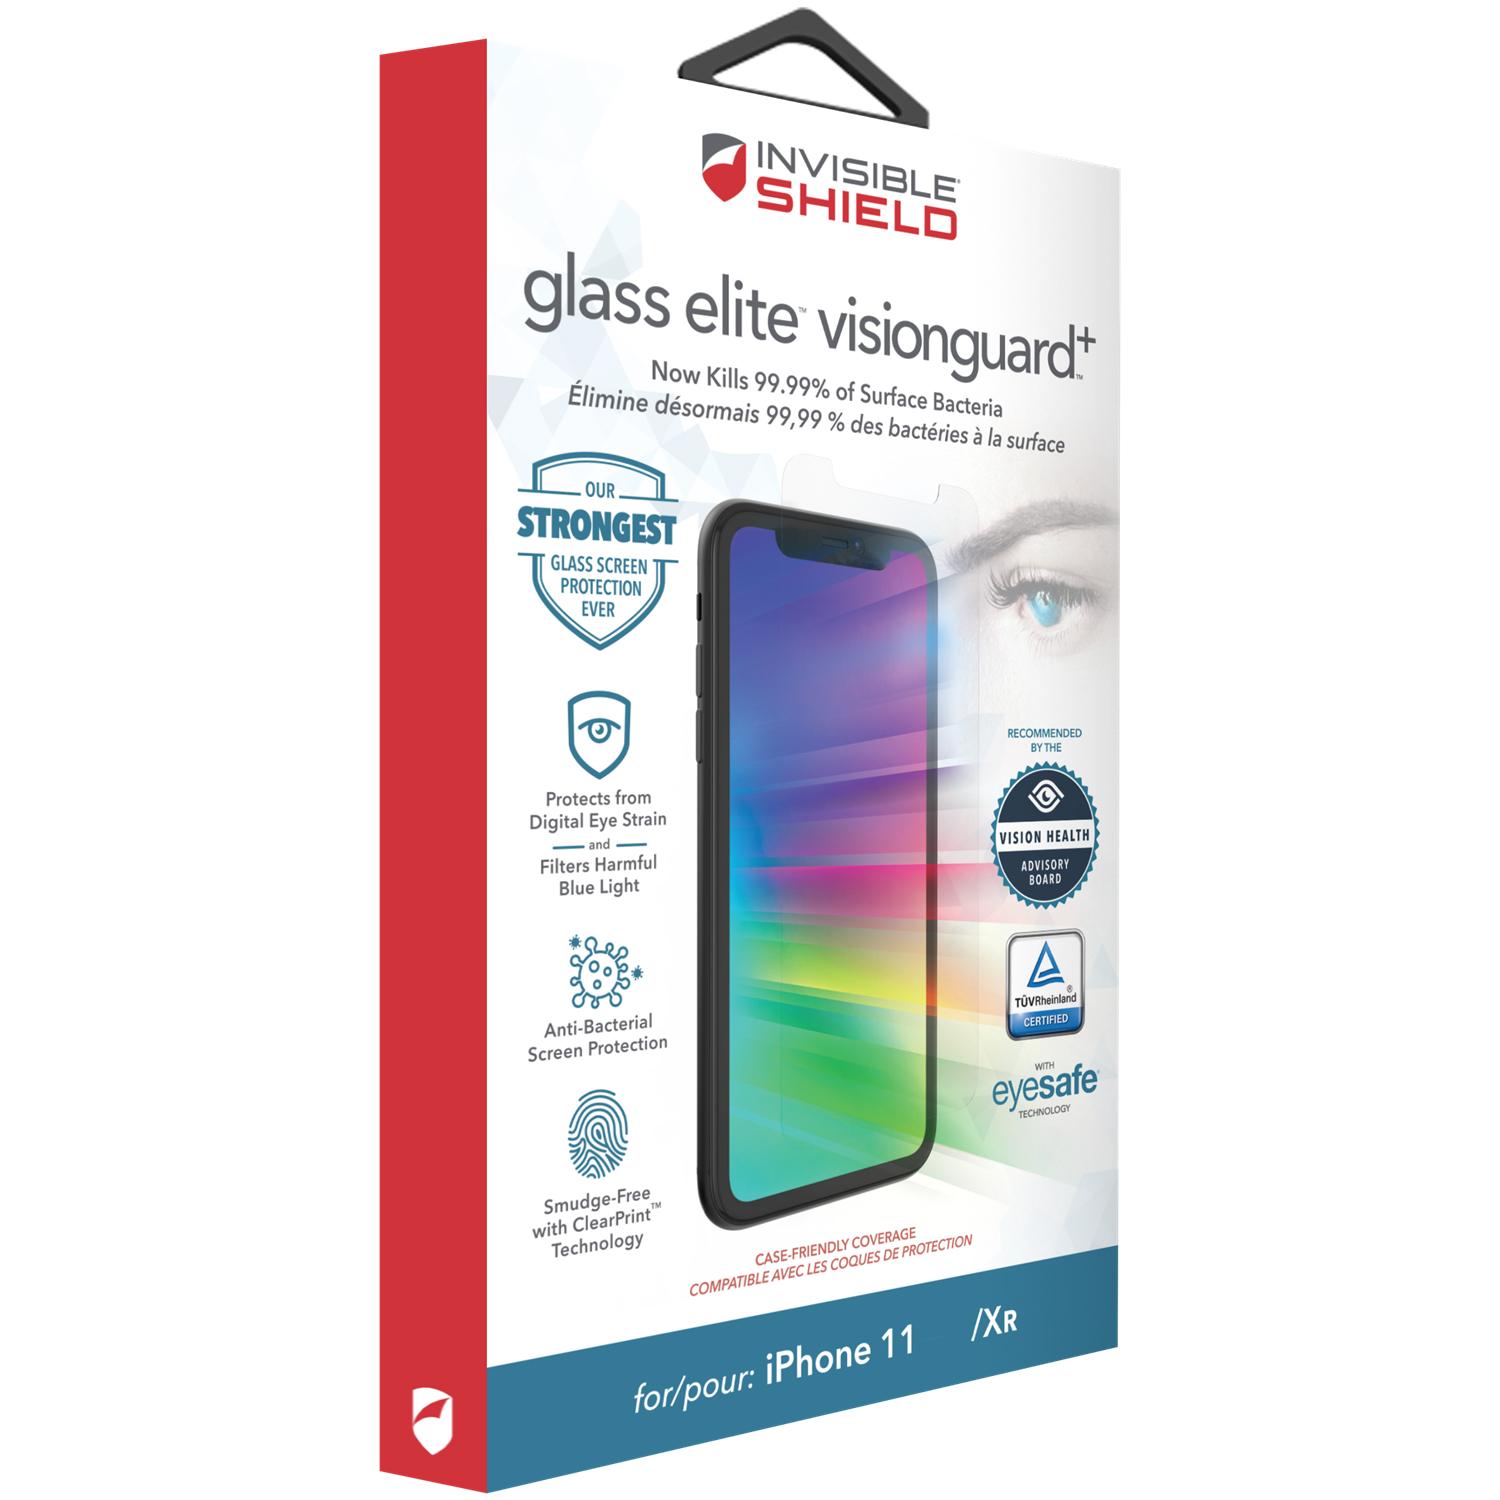 InvisibleShield Glass Elite Visionguard+ iPhone XR/11